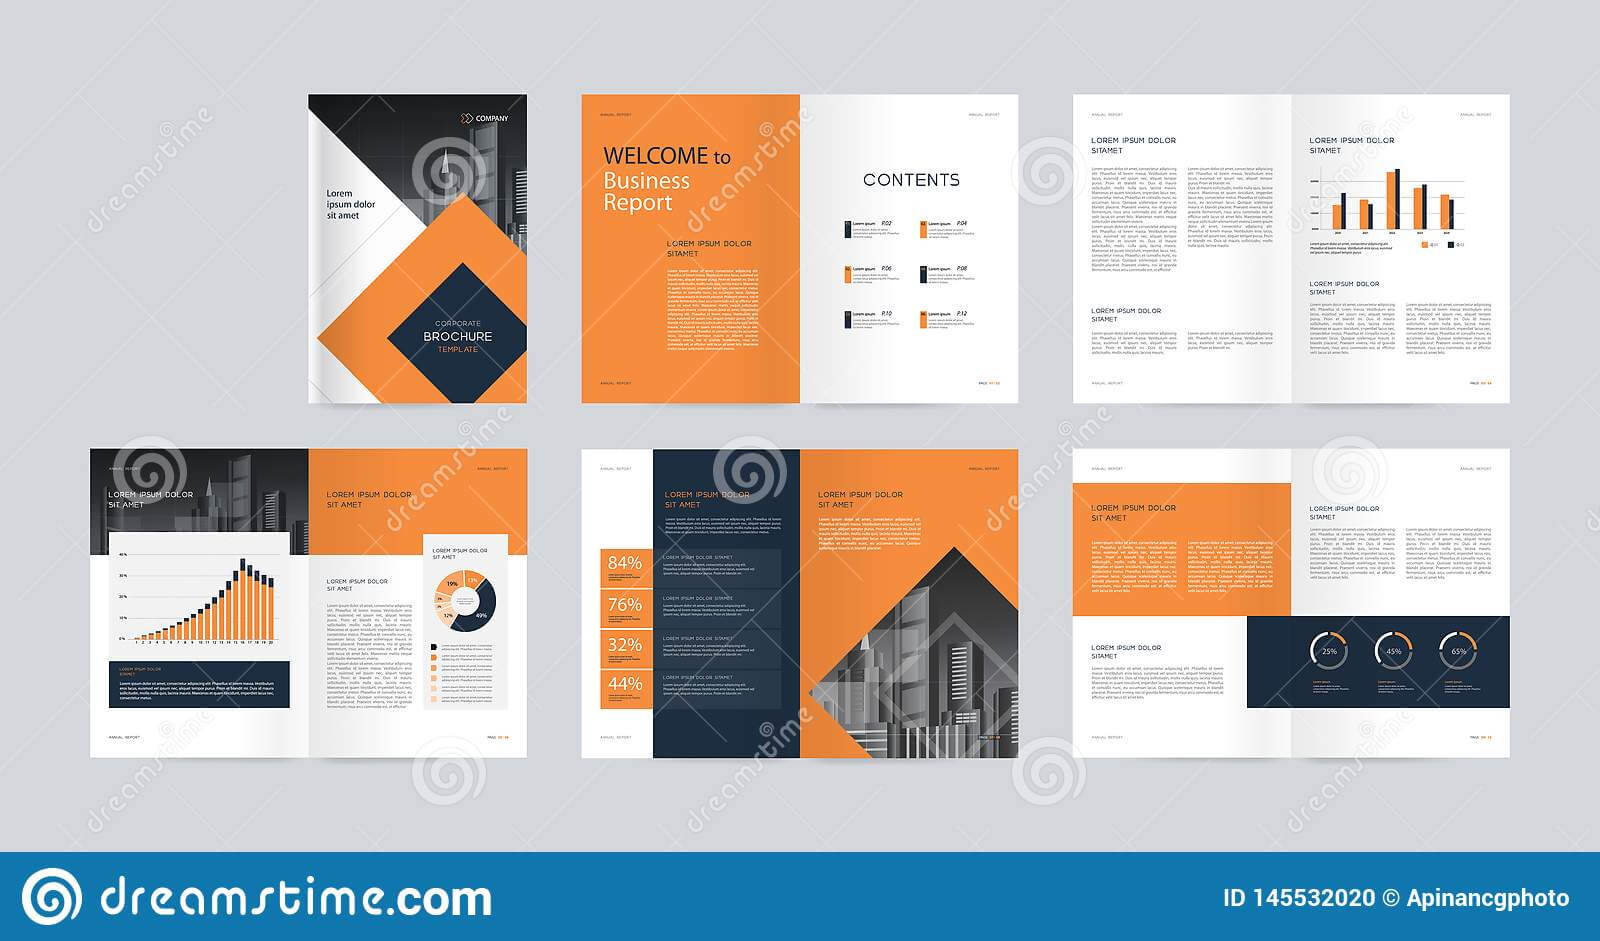 Template Layout Design With Cover Page For Company Profile Intended For Fancy Brochure Templates